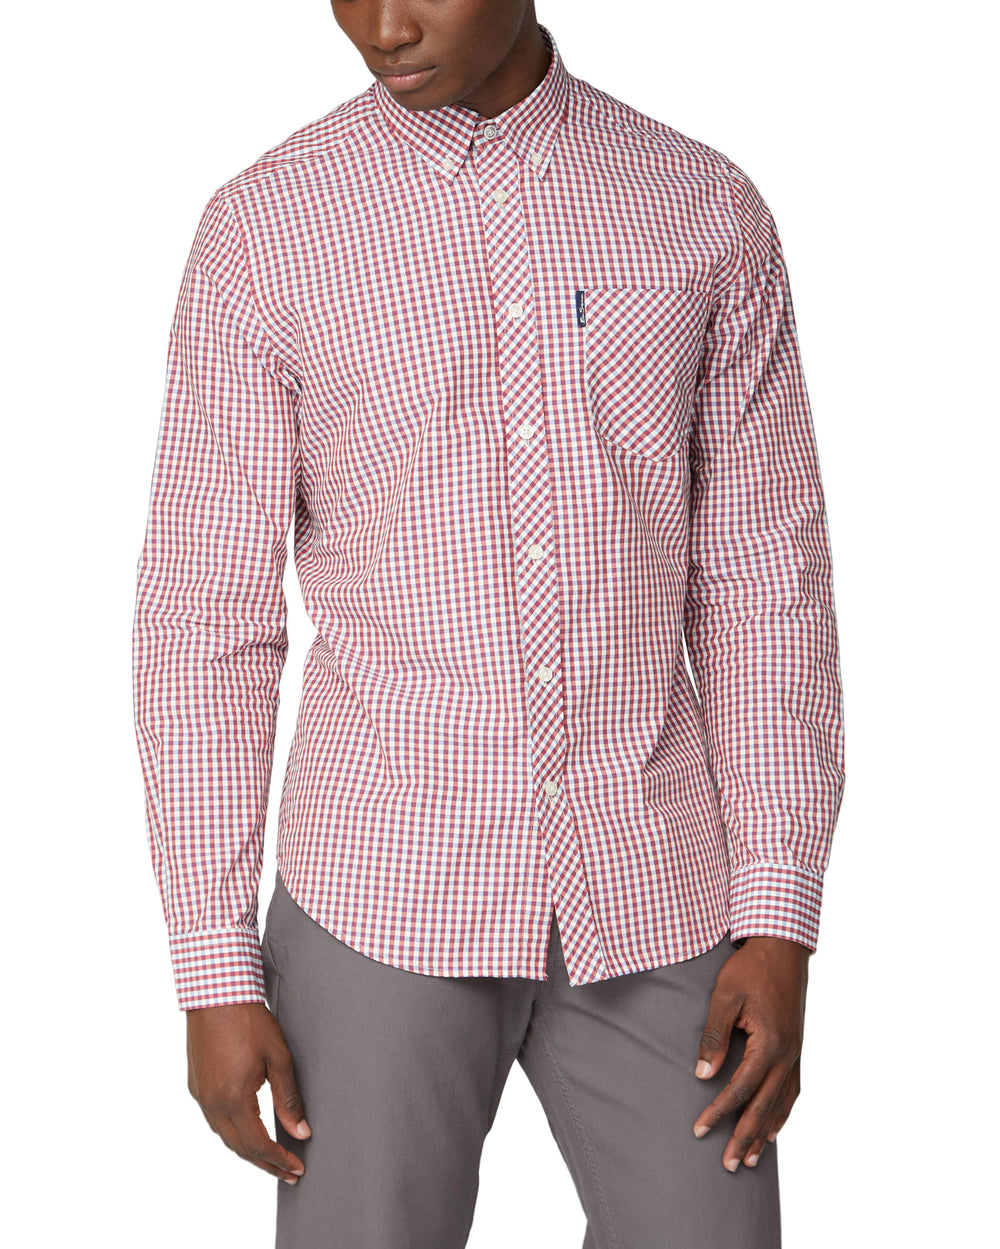 Long-Sleeve Signature Gingham Shirt - Red